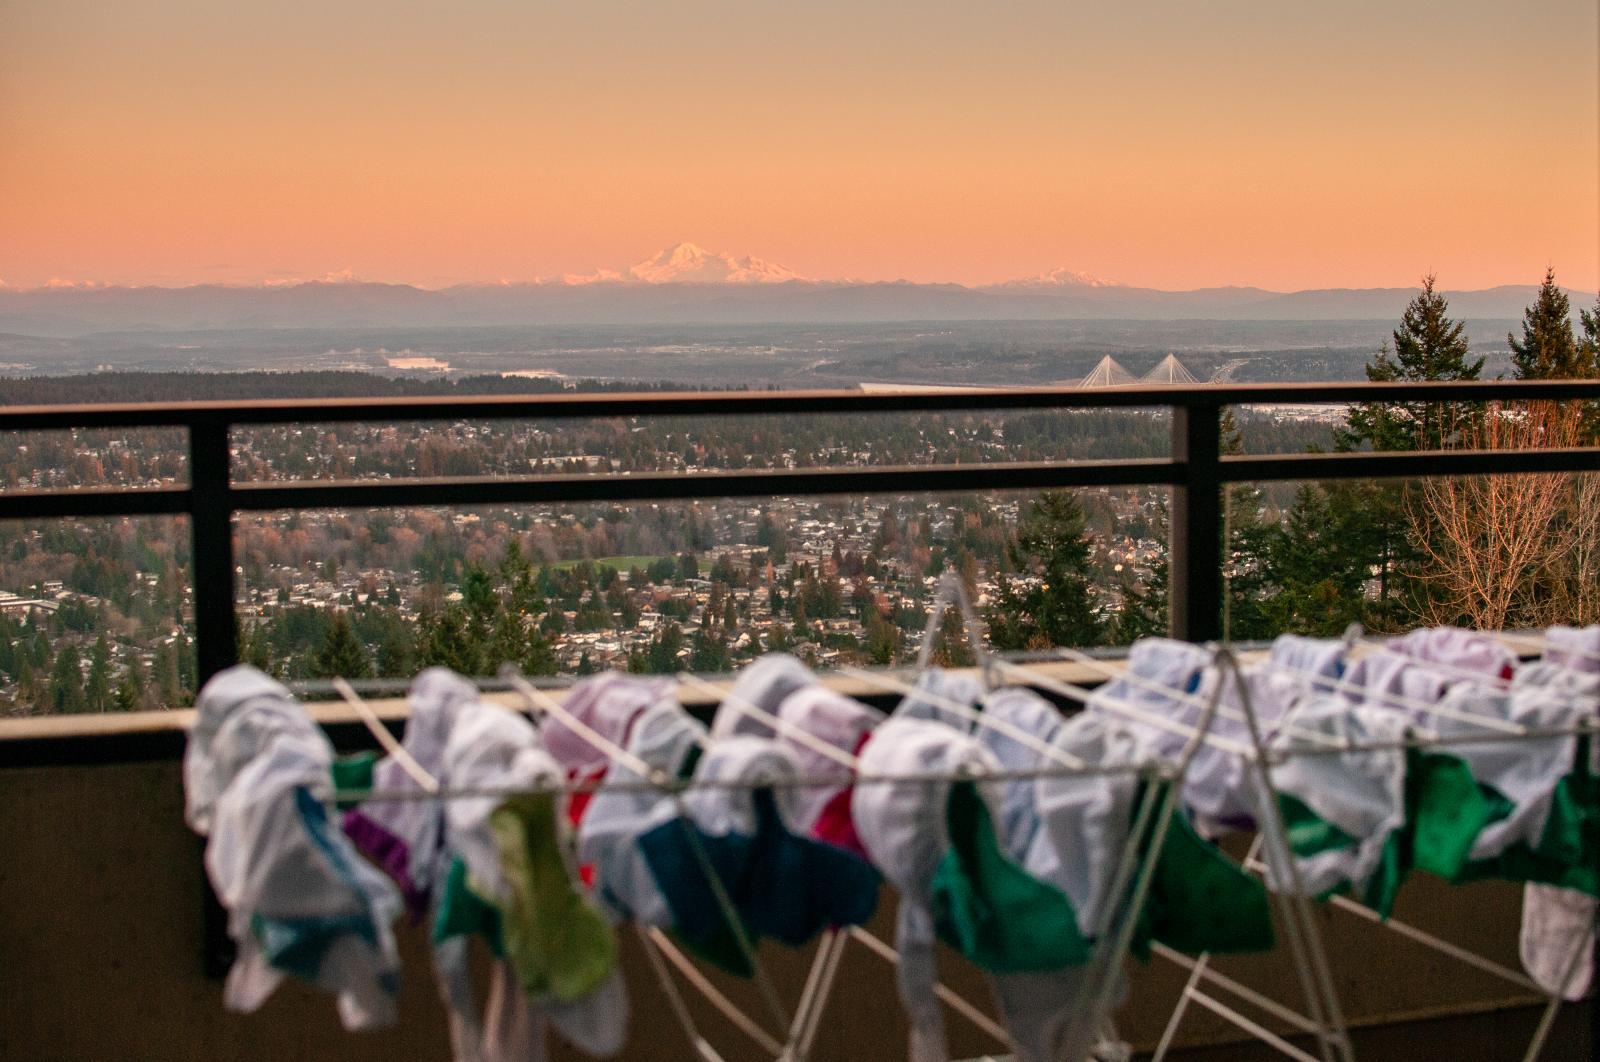 25 cloth diapers hang to dry on...dfills. Photo: Kristine Nyborg 